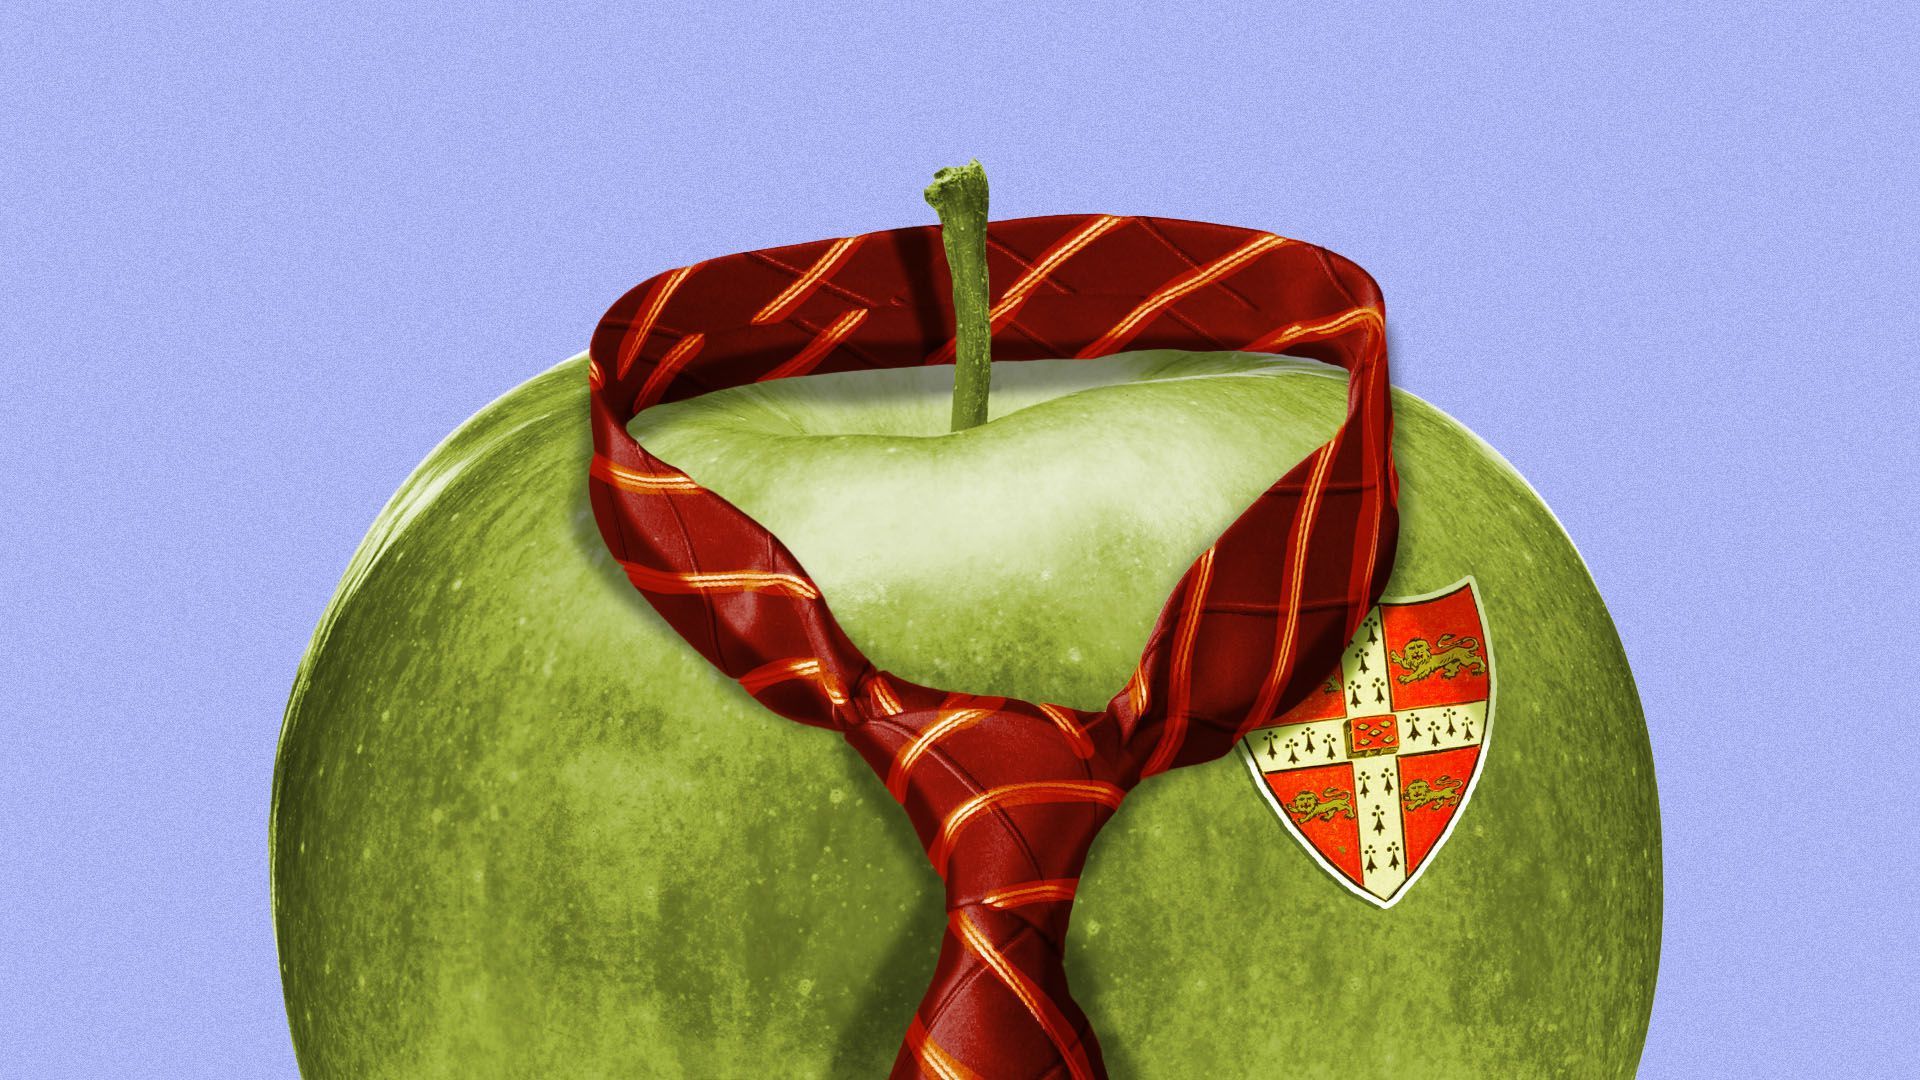 Illustration of an apple wearing a private school tie and emblem 